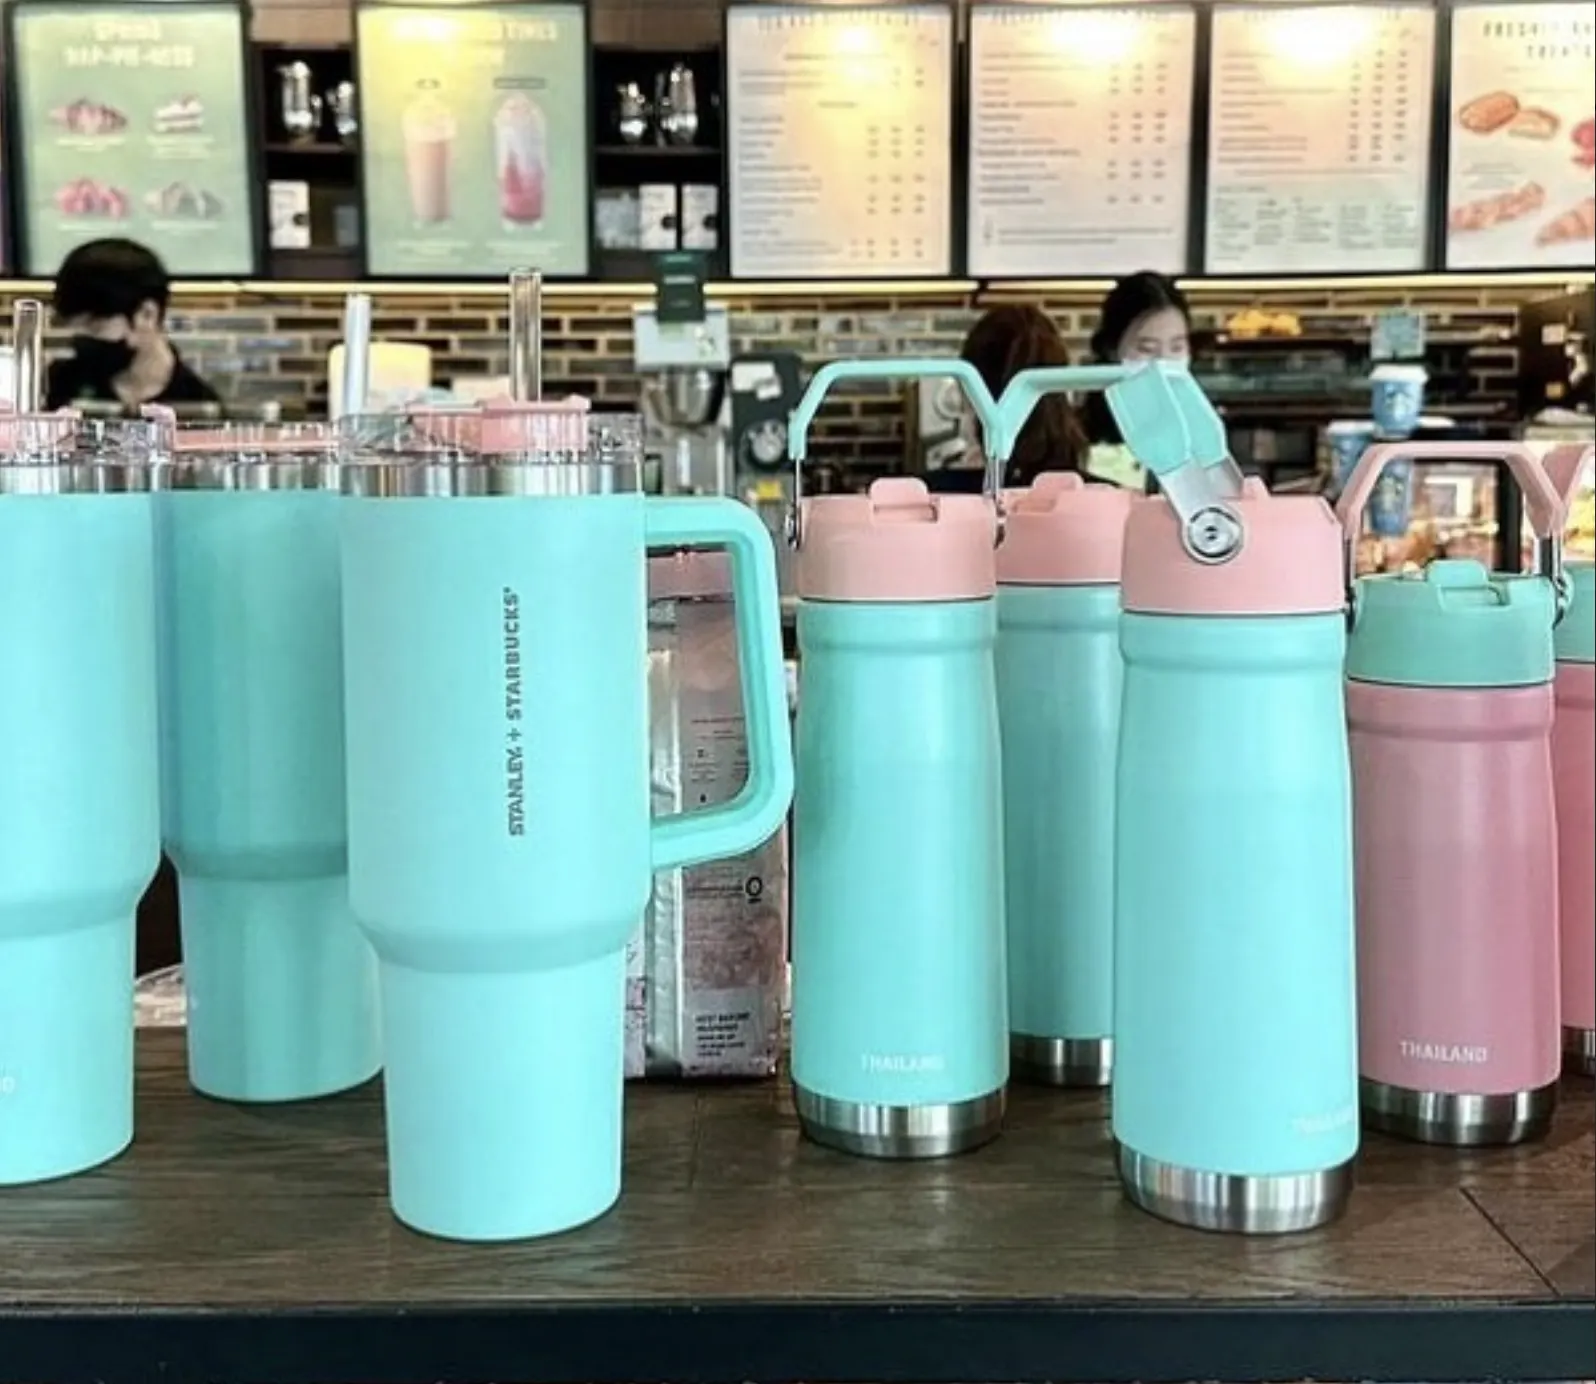 Here's Where You Can Get The Viral Starbucks Stanley Tumblers